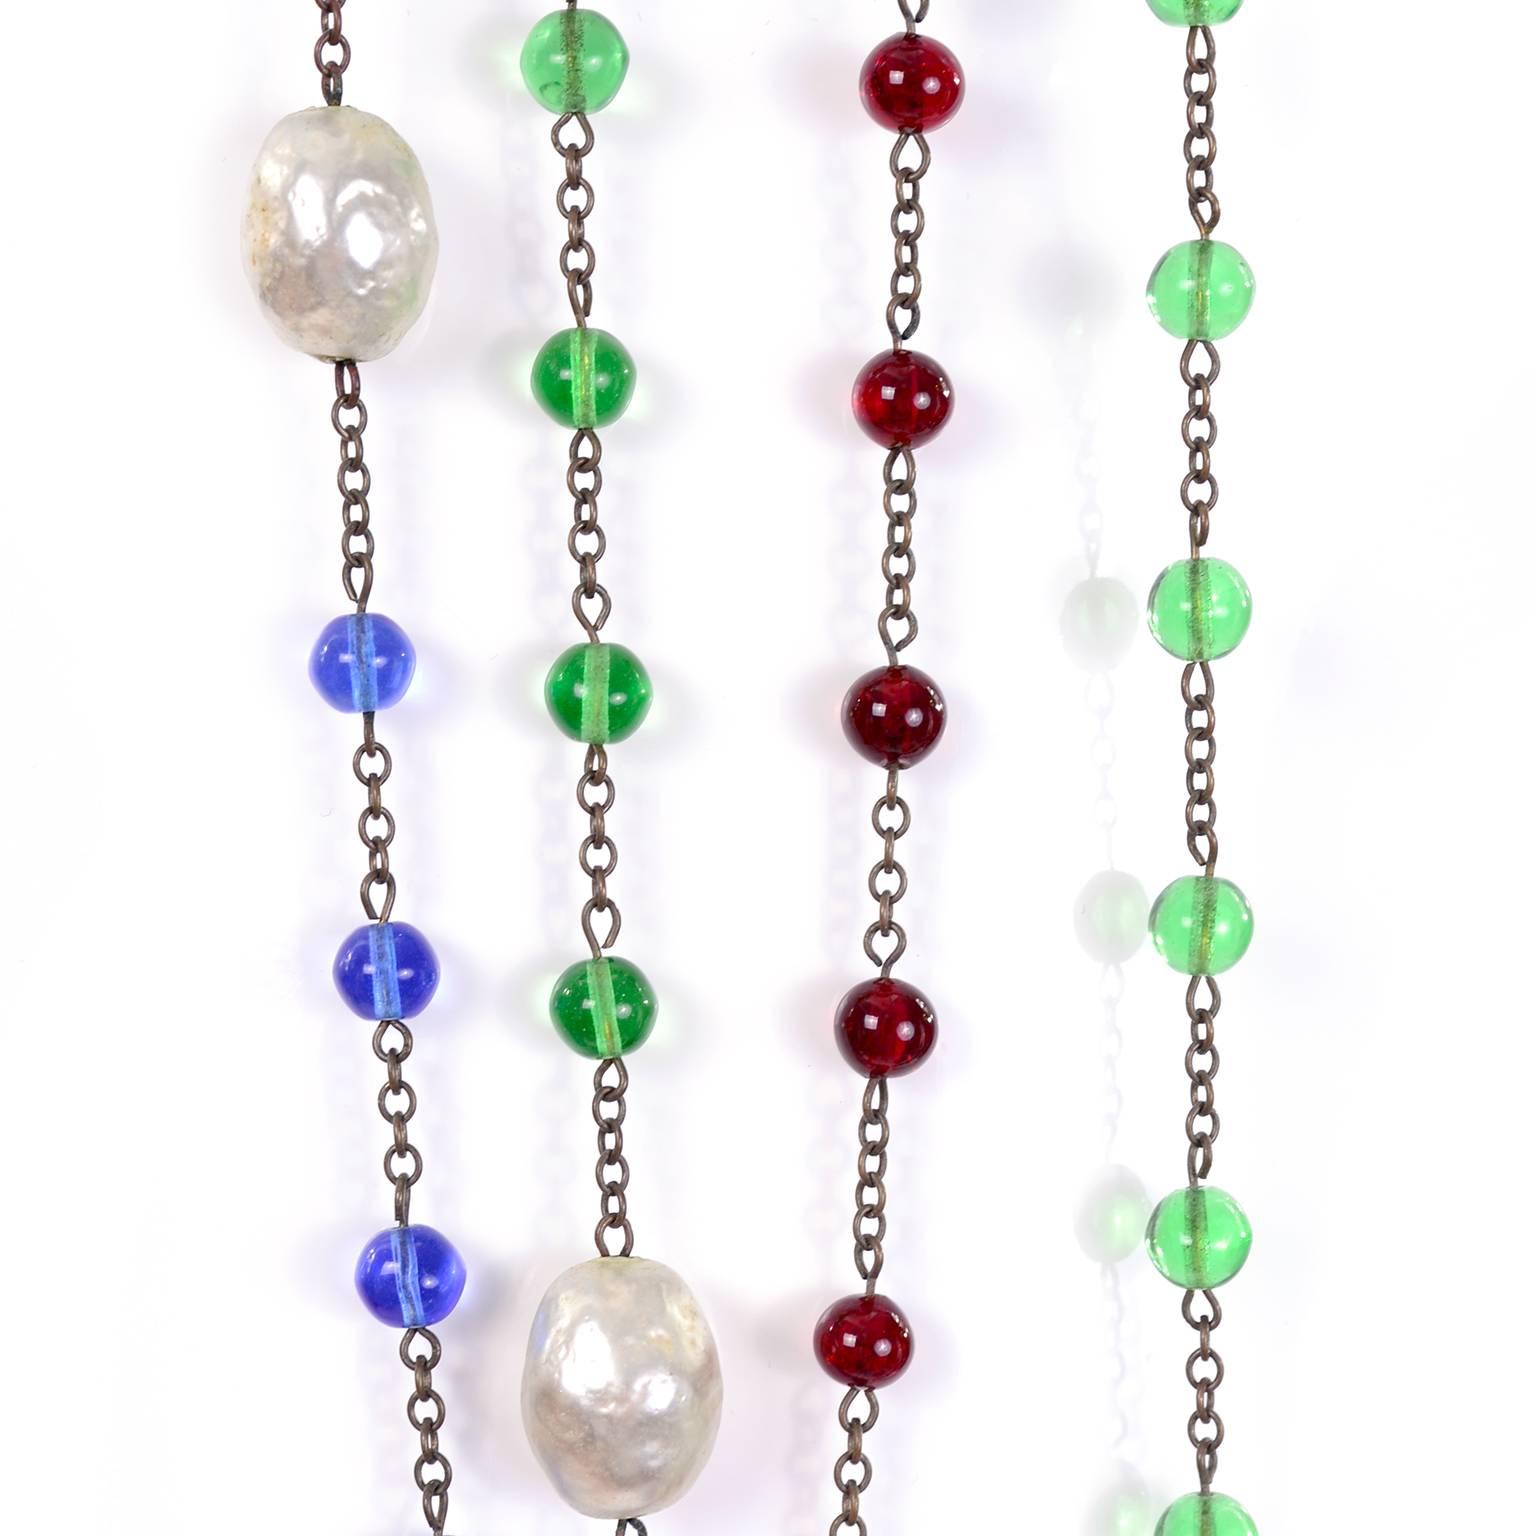 Women's 1920s Art Deco Murano Glass Bead Brass Necklace in Red Blue and Green Extra Long